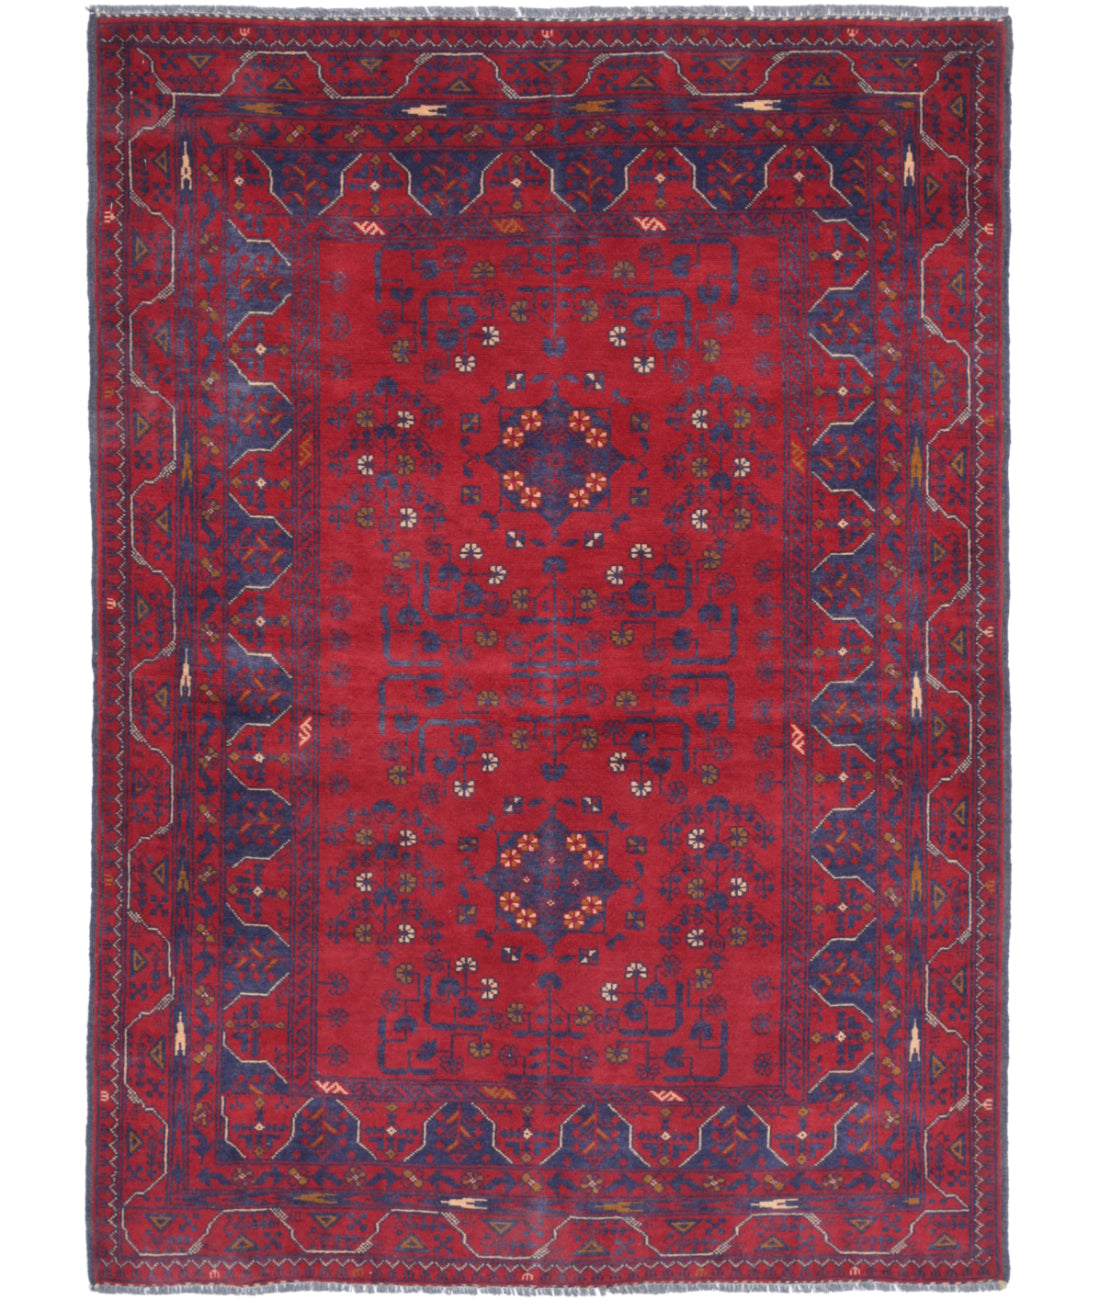 Hand Knotted Afghan Khamyab Wool Rug - 3'4'' x 4'9'' 3'4'' x 4'9'' (100 X 143) / Red / Red